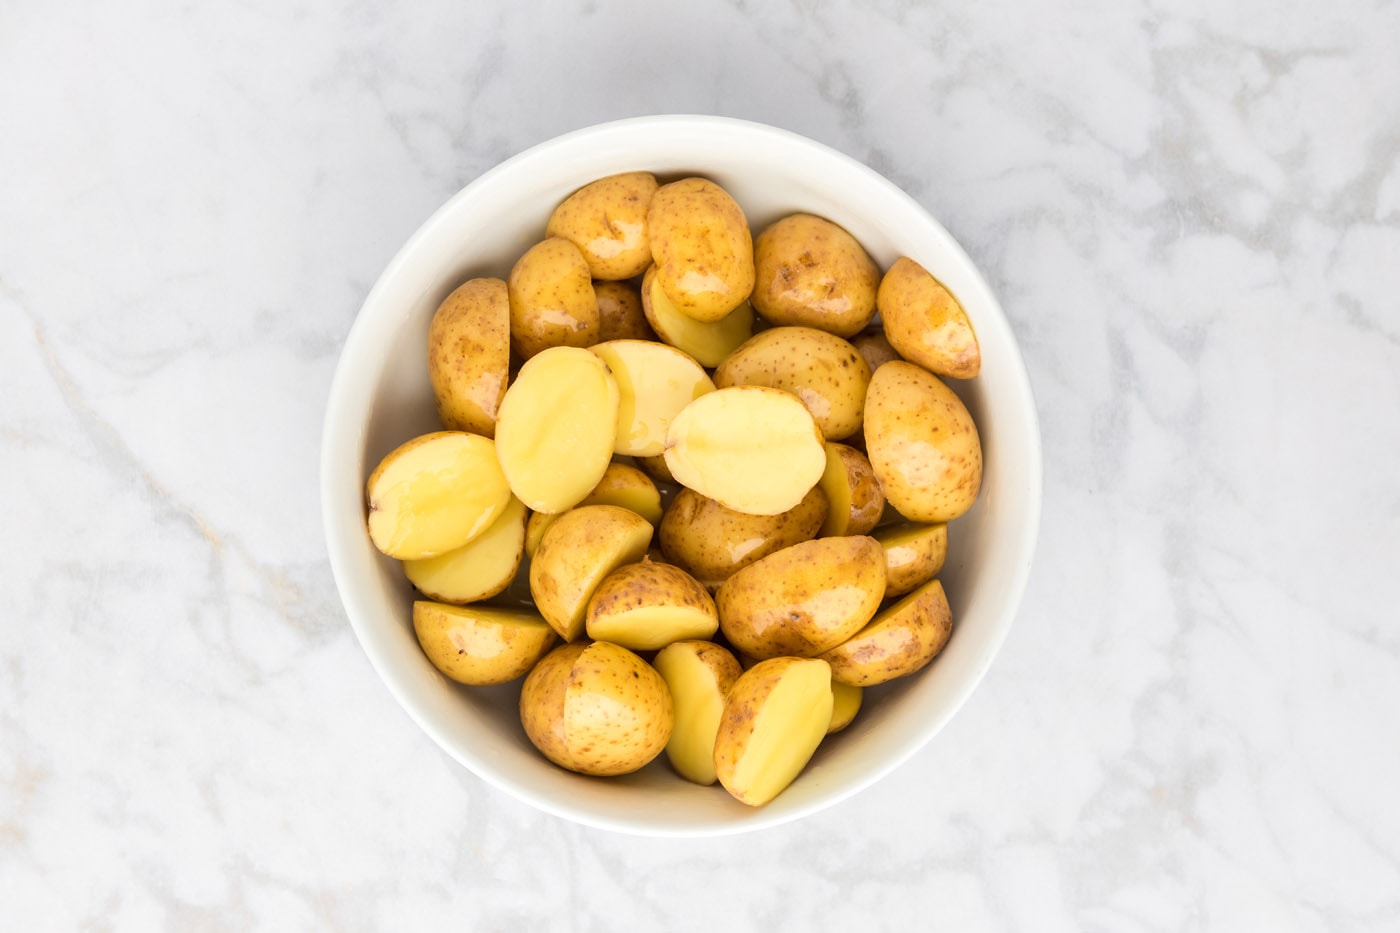 potatoes tossed with olive oil